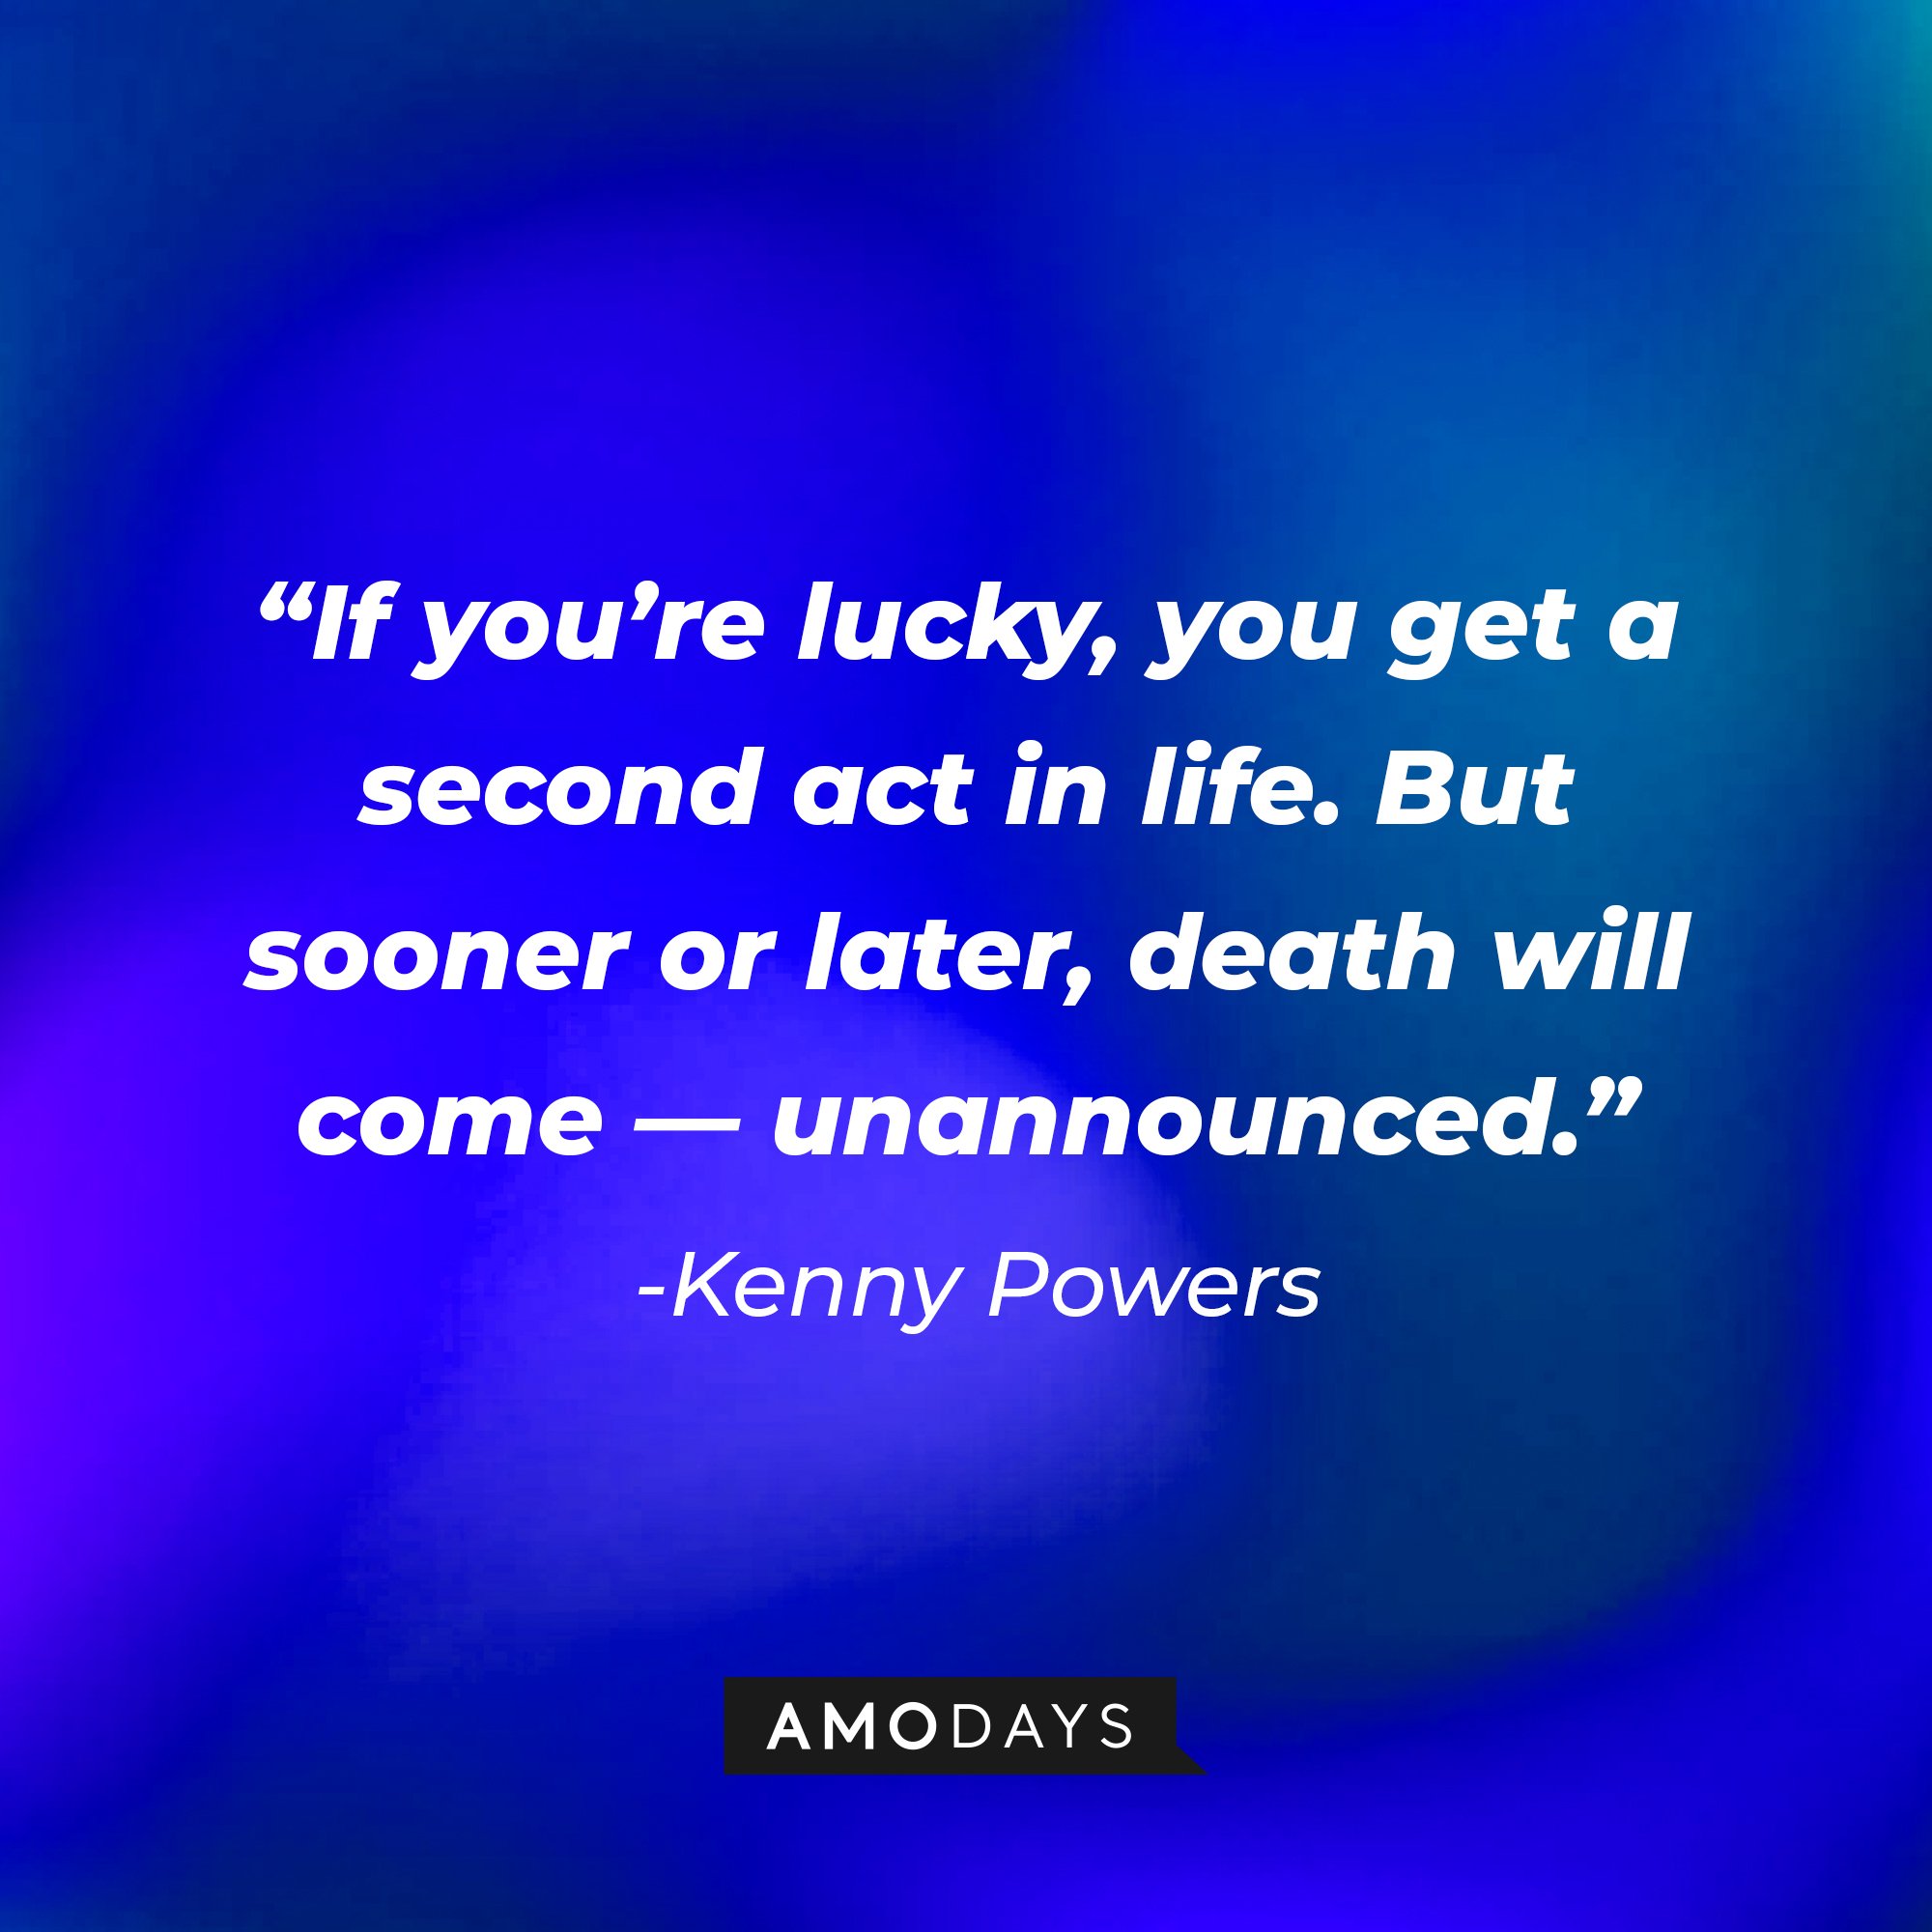 Kenny Powers’ quote: "If you're lucky, you get a second act in life. But sooner or later, death will come—unannounced."  | Image: AmoDays